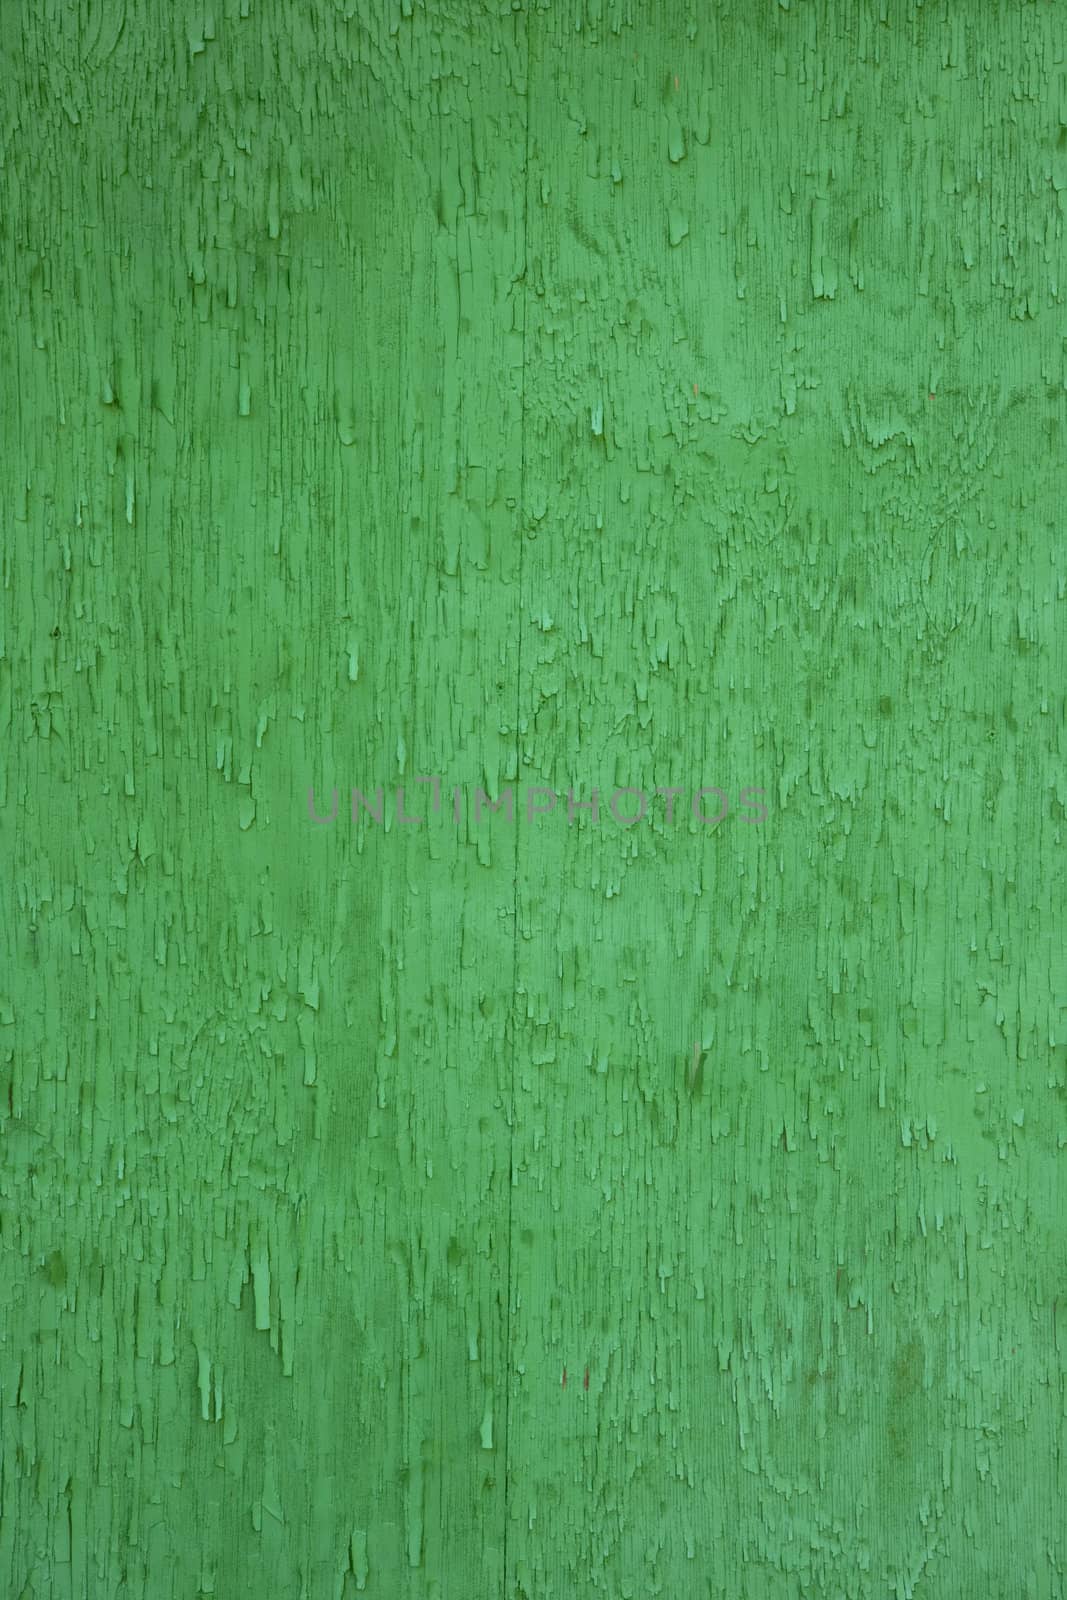 rough wood background in intense green color by PixelsAway